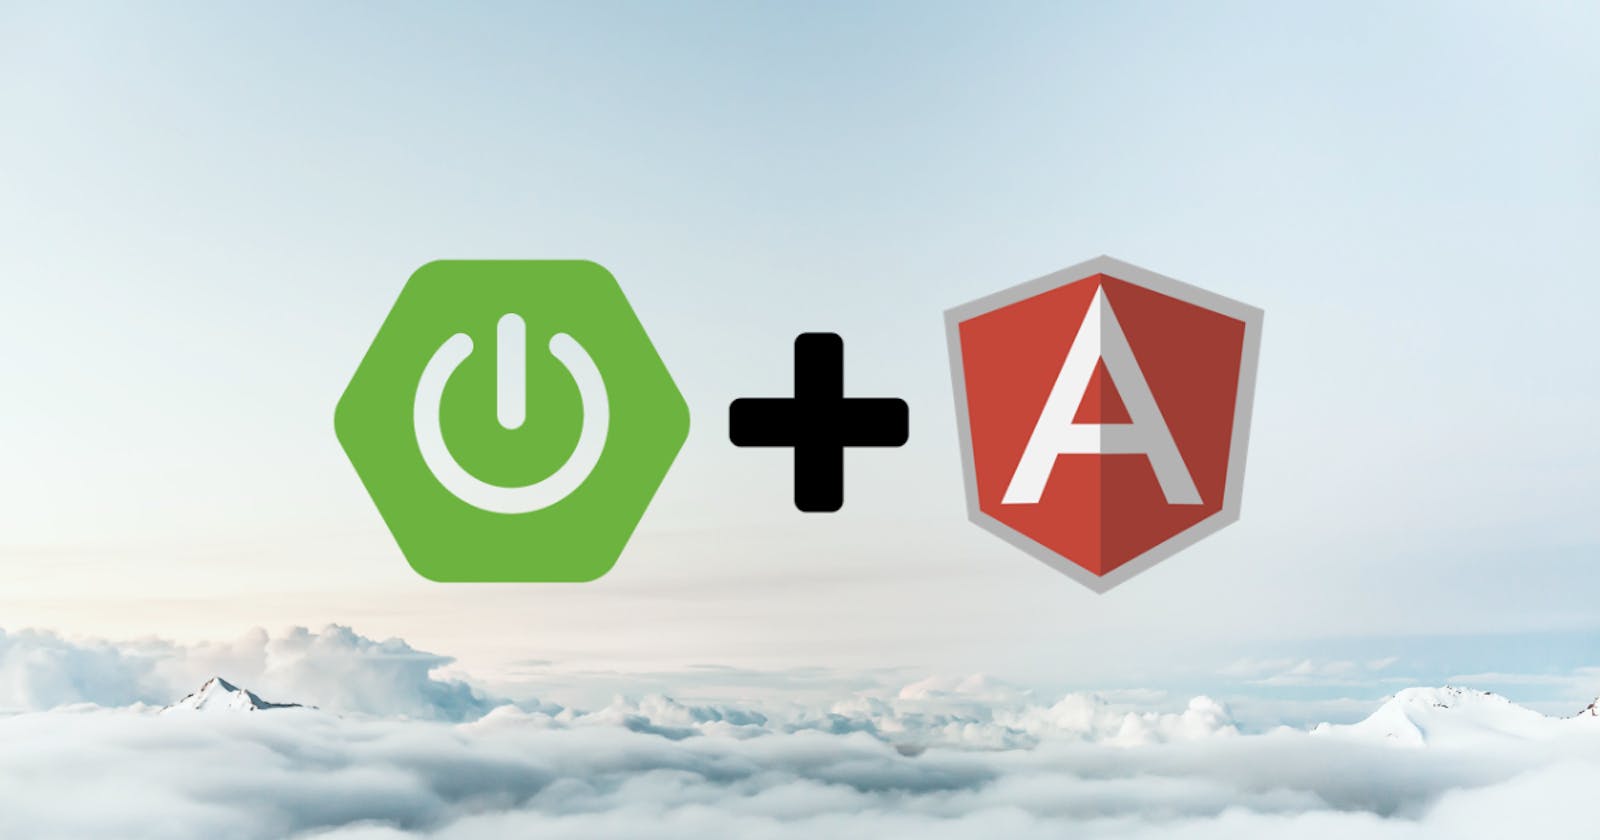 Spring-boot and Angular | Part1